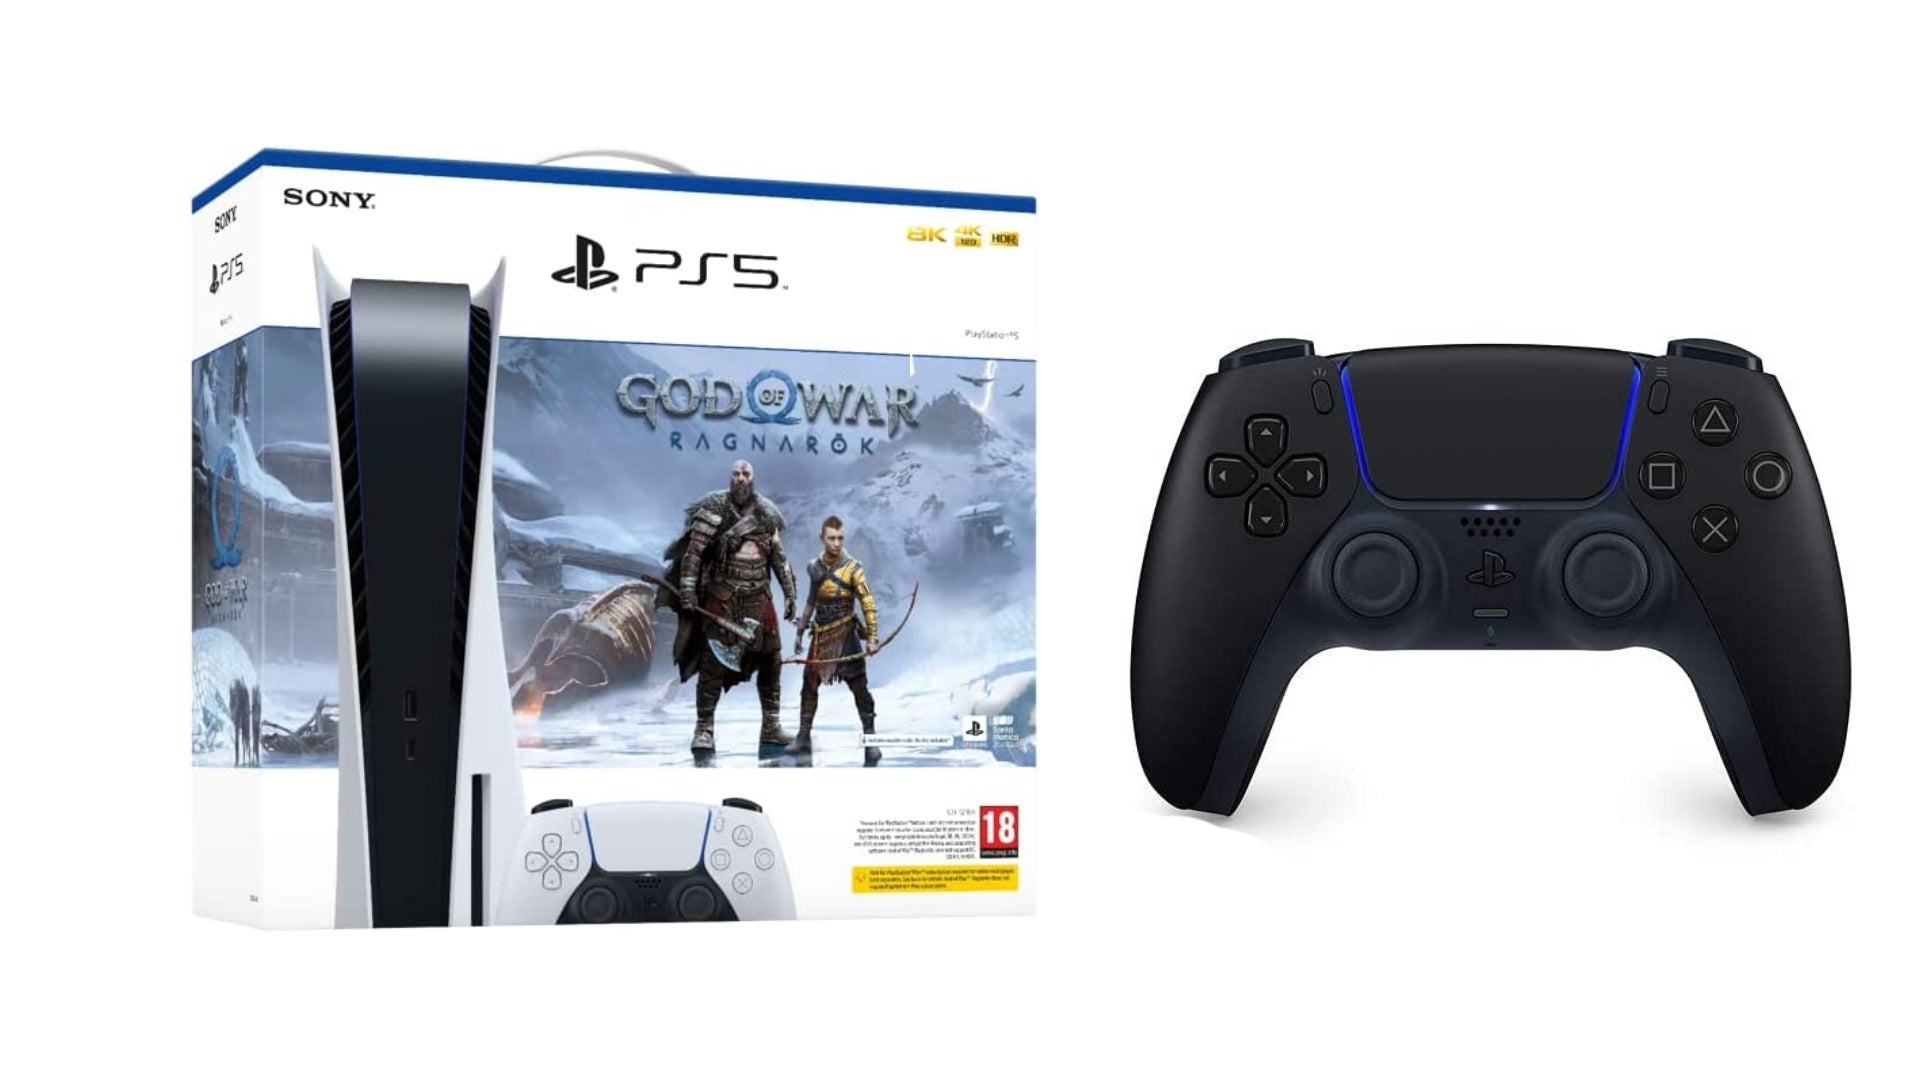 Image for Get the PS5 Disc Console + God of War Ragnarok bundle with a free controller for ?540